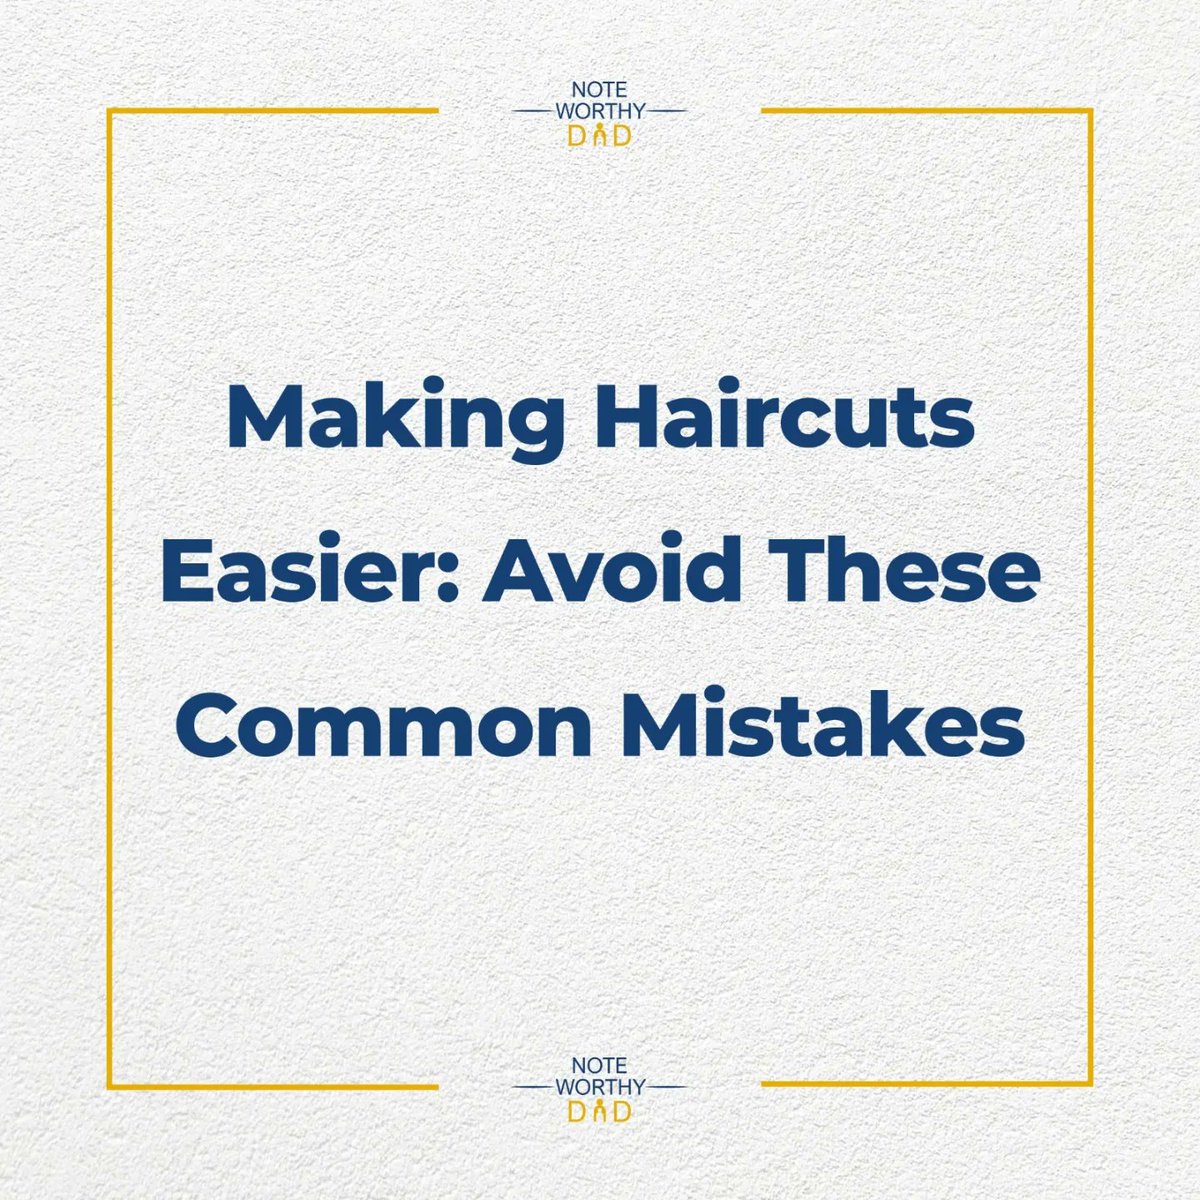 📢NEW BLOG ALERT📢

Making Haircuts Easier: Avoid these mistakes. 

Link in bio 

#noteworthydad #ParentingTips #ParentingAdvice #DadAdvice #fyp #dads #parents #fathers #toddlerhairstyles #badhairday #parentingproblems